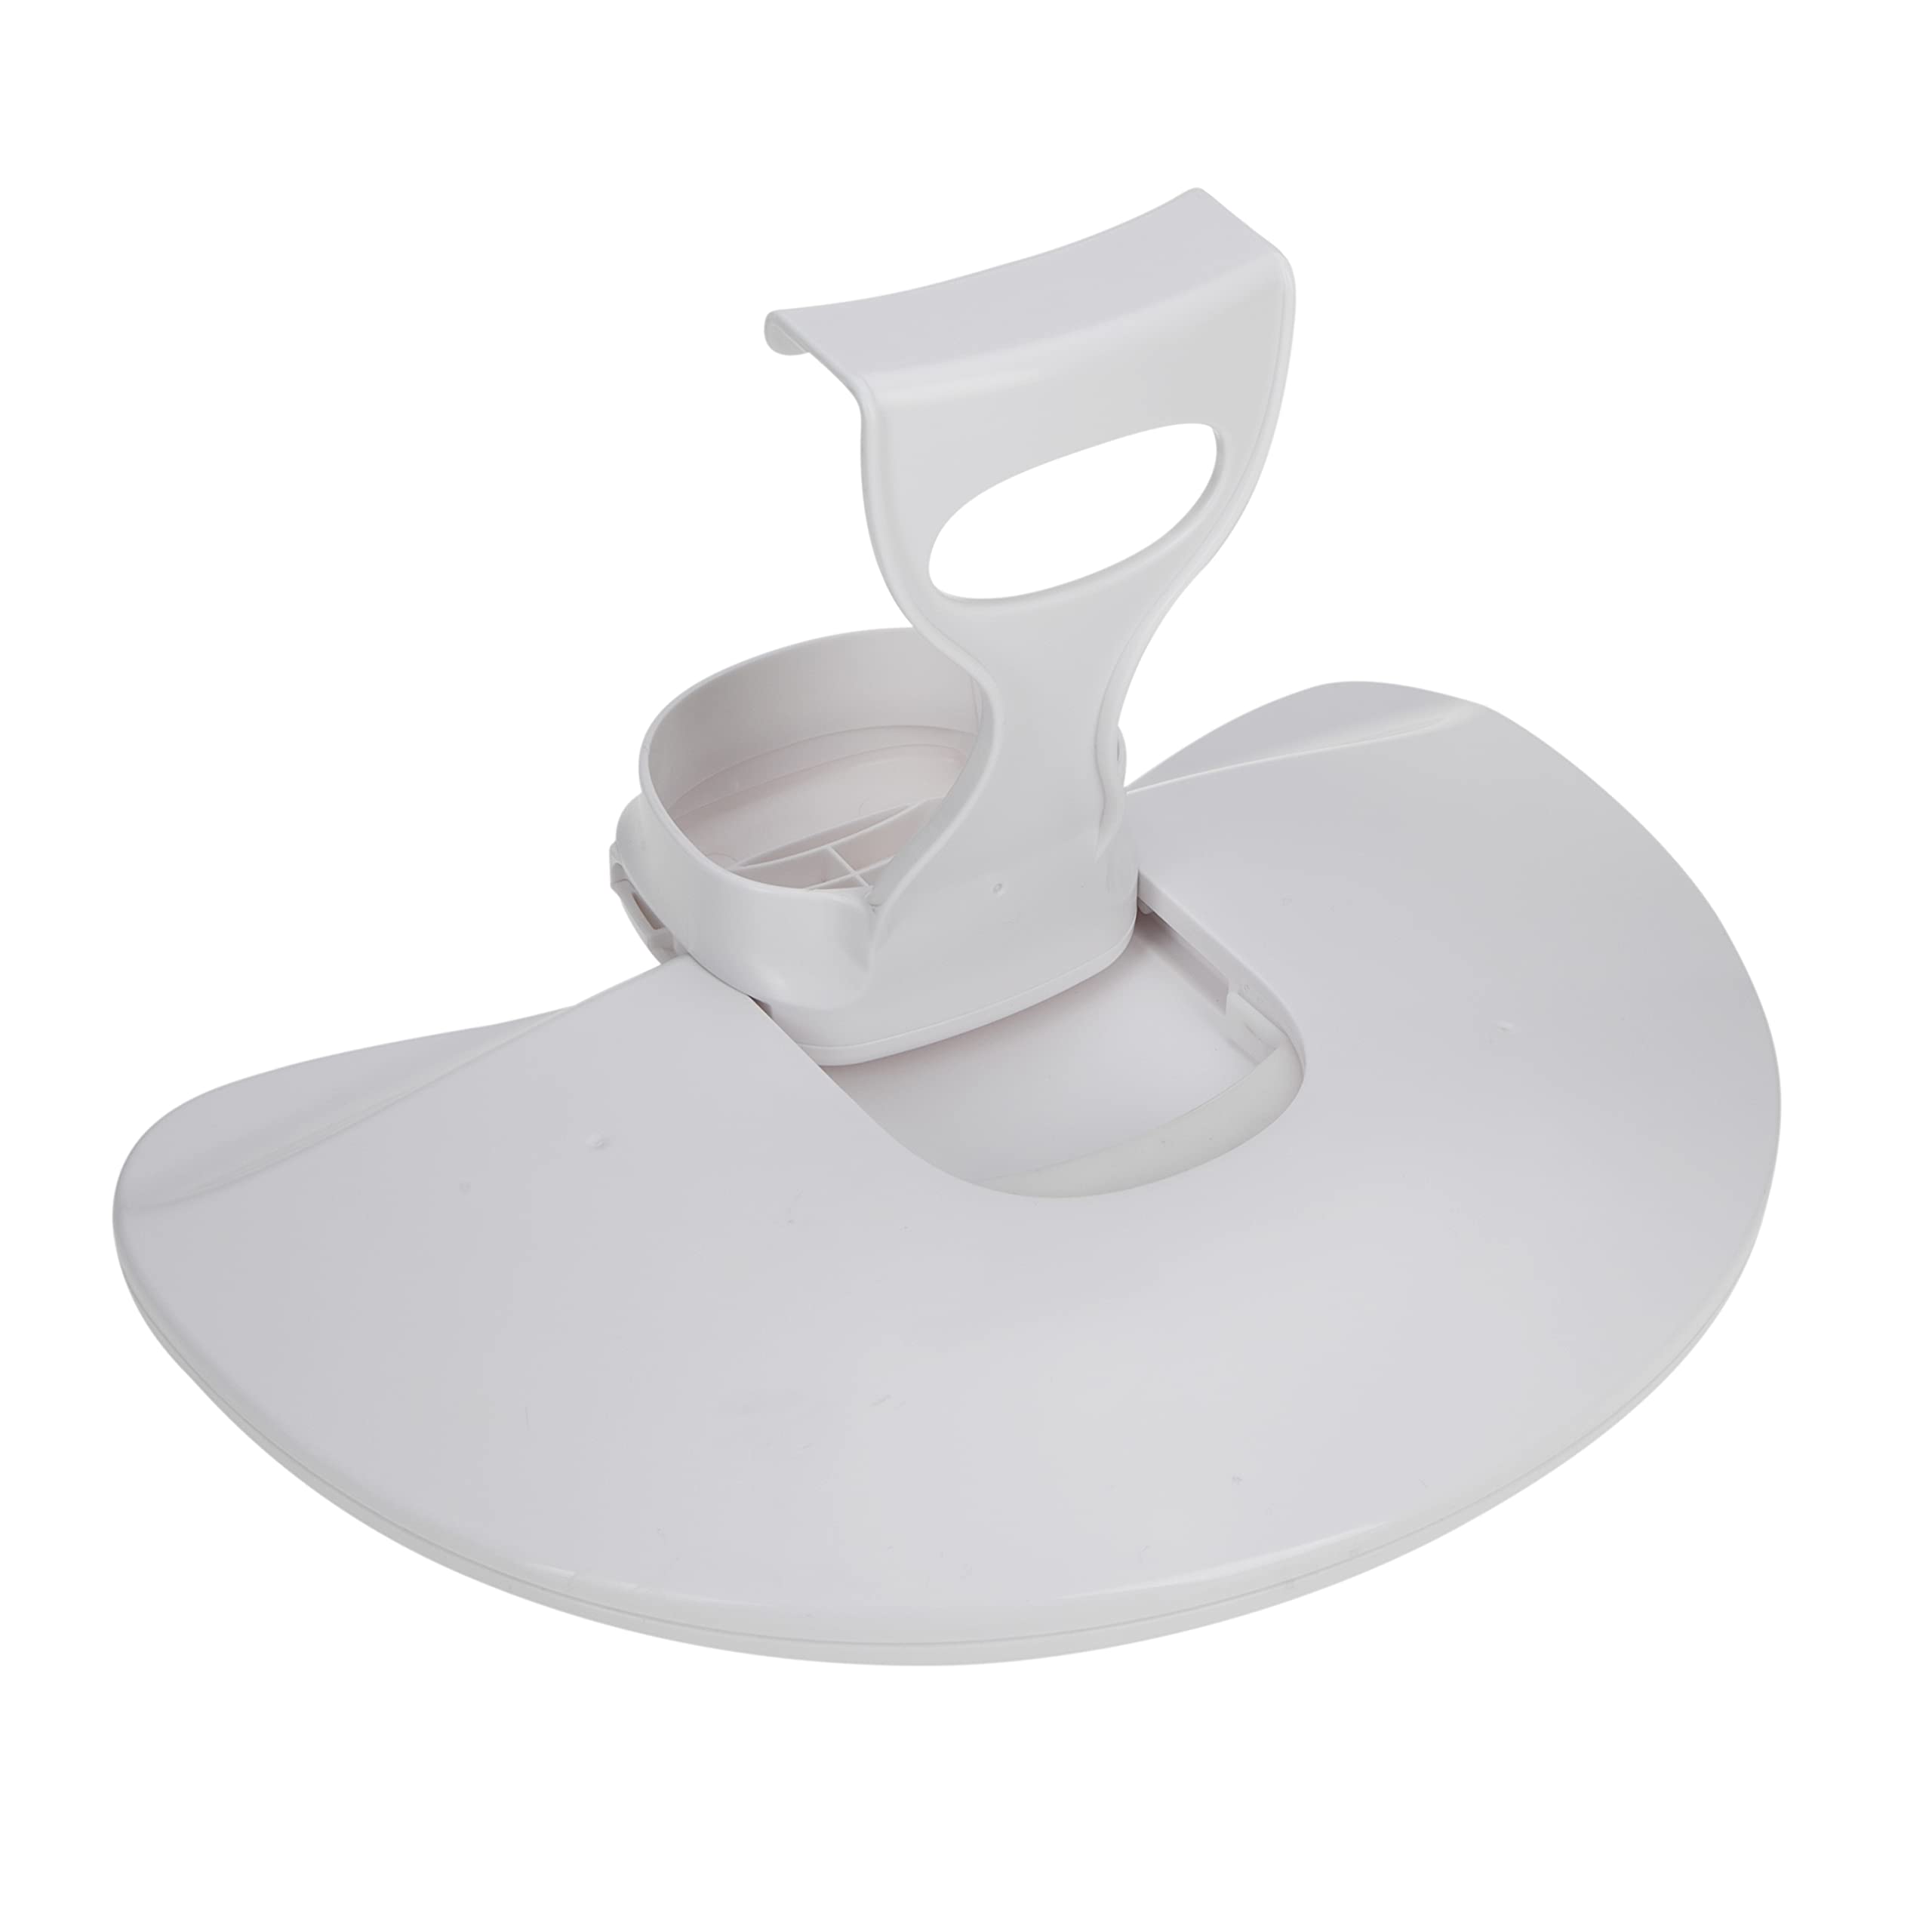 Nuby My Floor Seat Activity Tray with Easy Release Latch, Easy to Clean, for Ages 4-12 Months